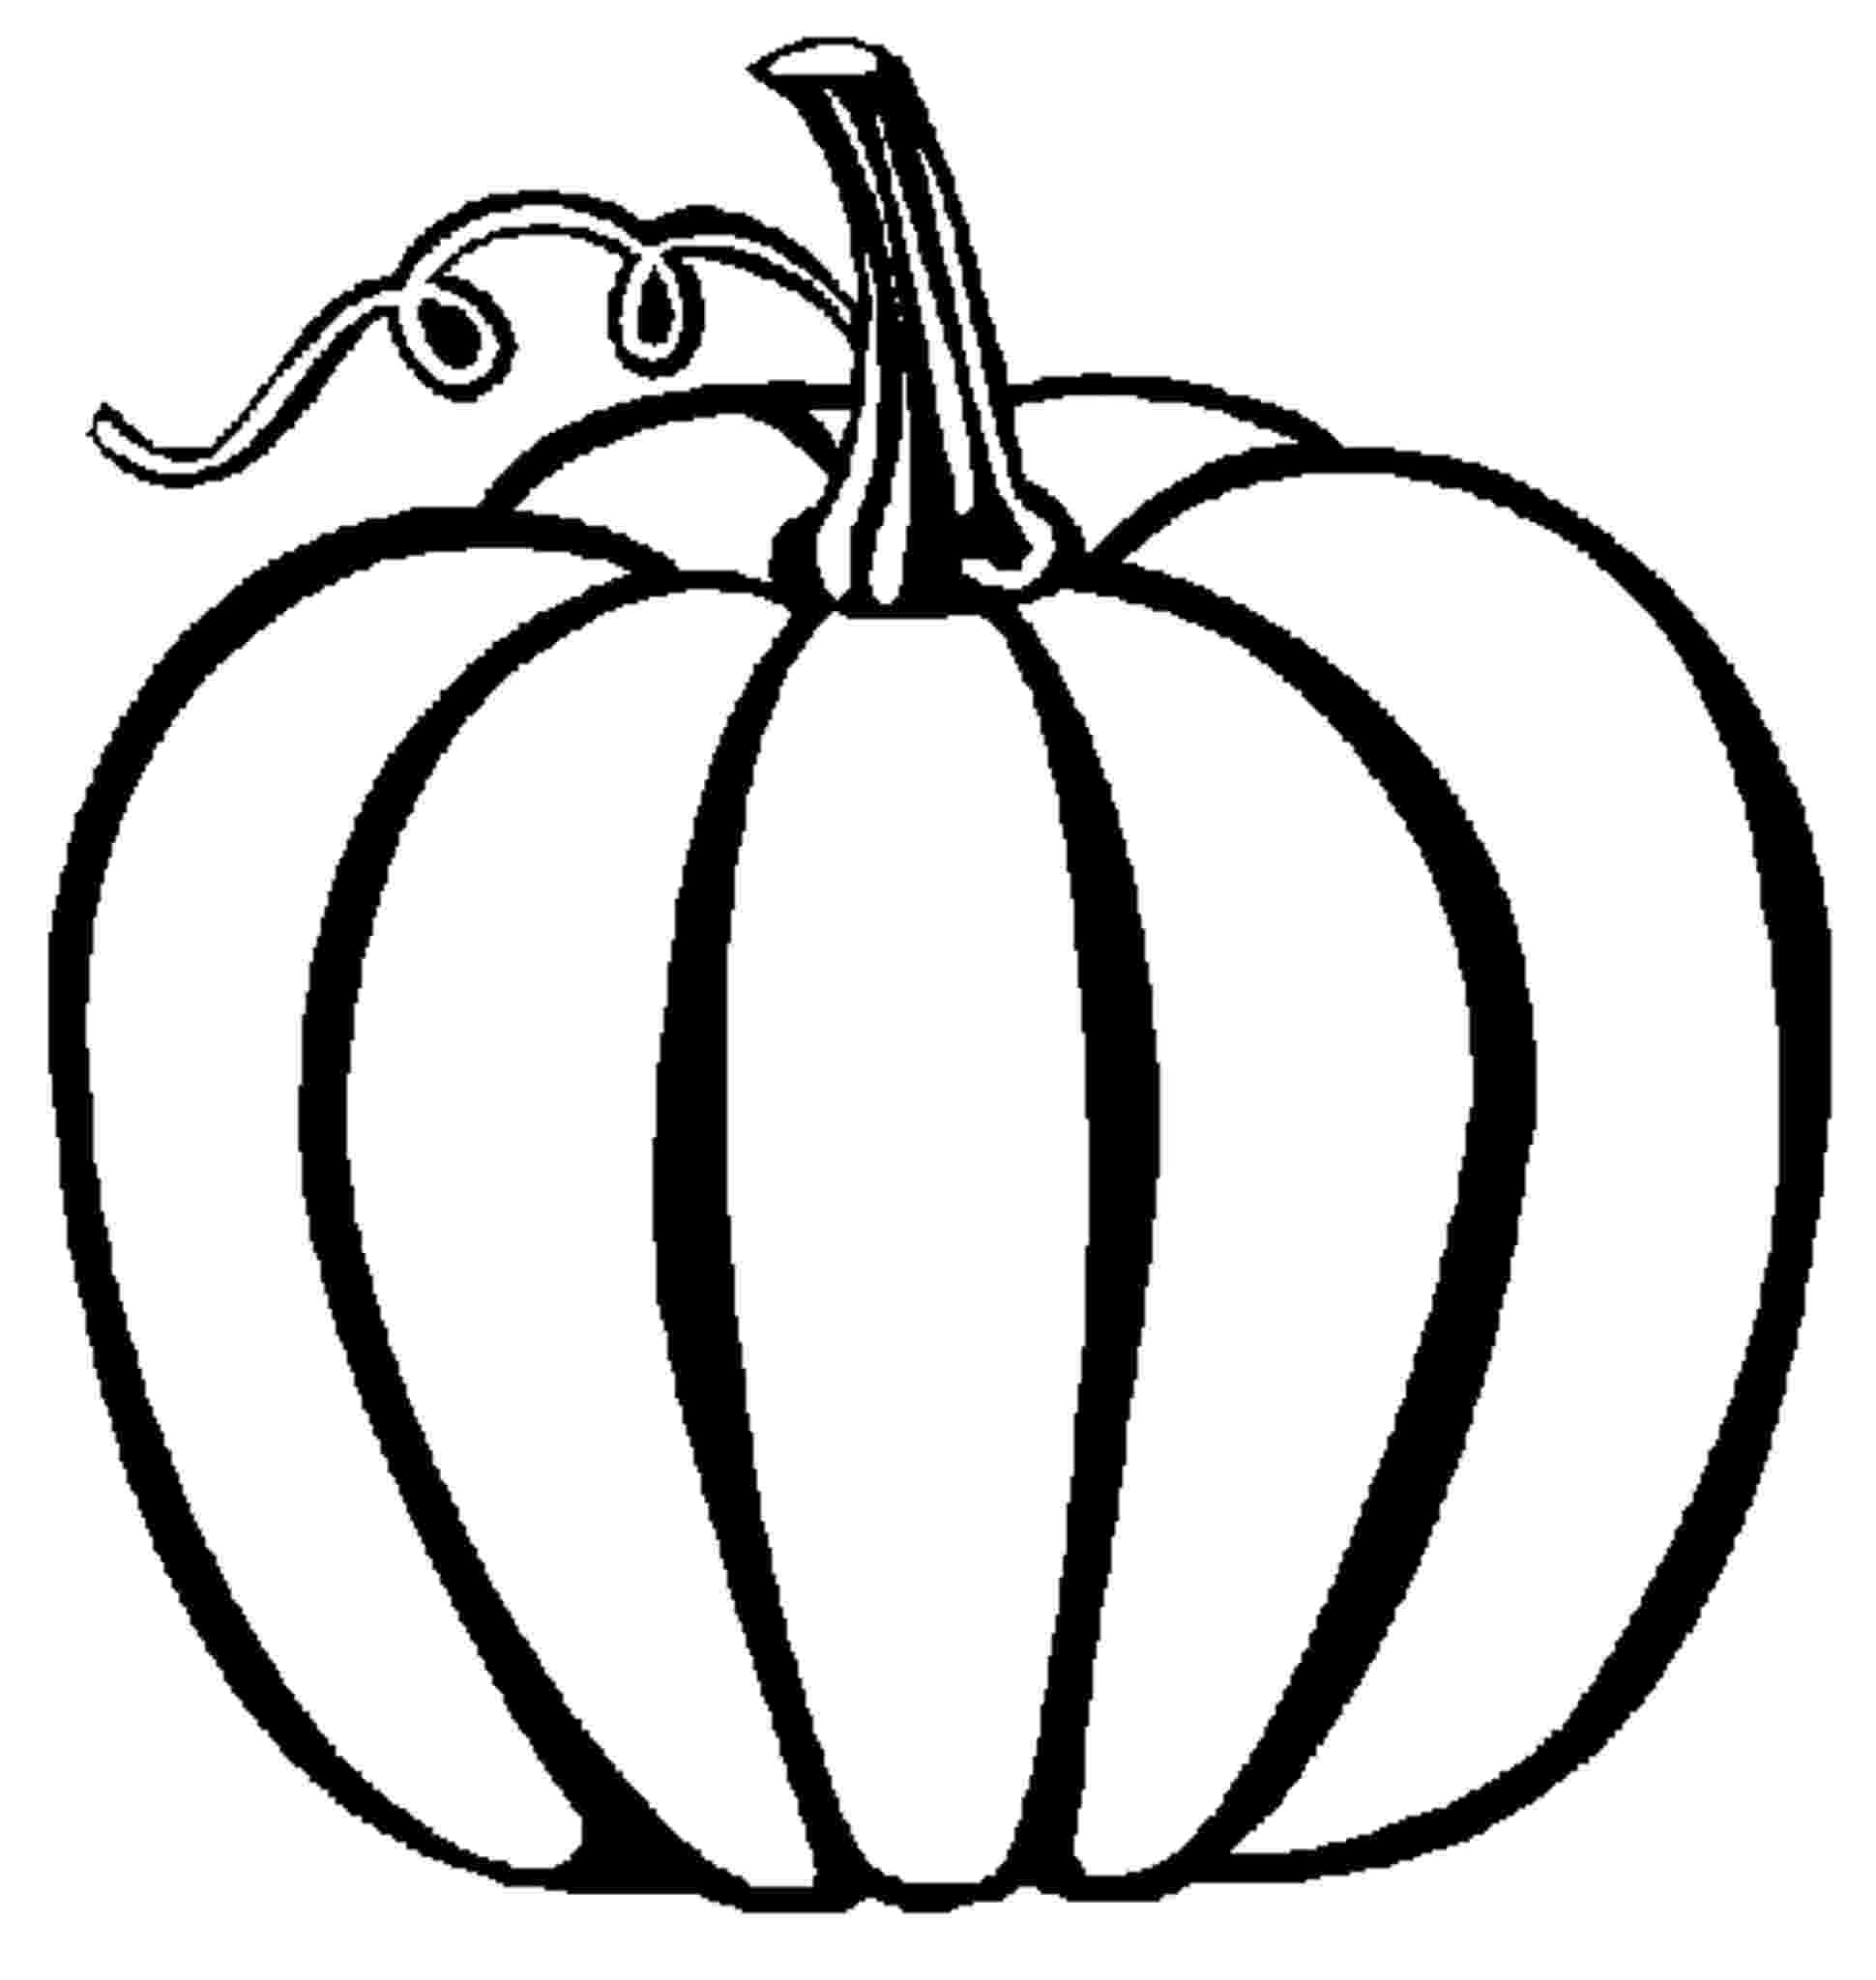 images of pumpkins to color free printable pumpkin coloring pages for kids of color images pumpkins to 